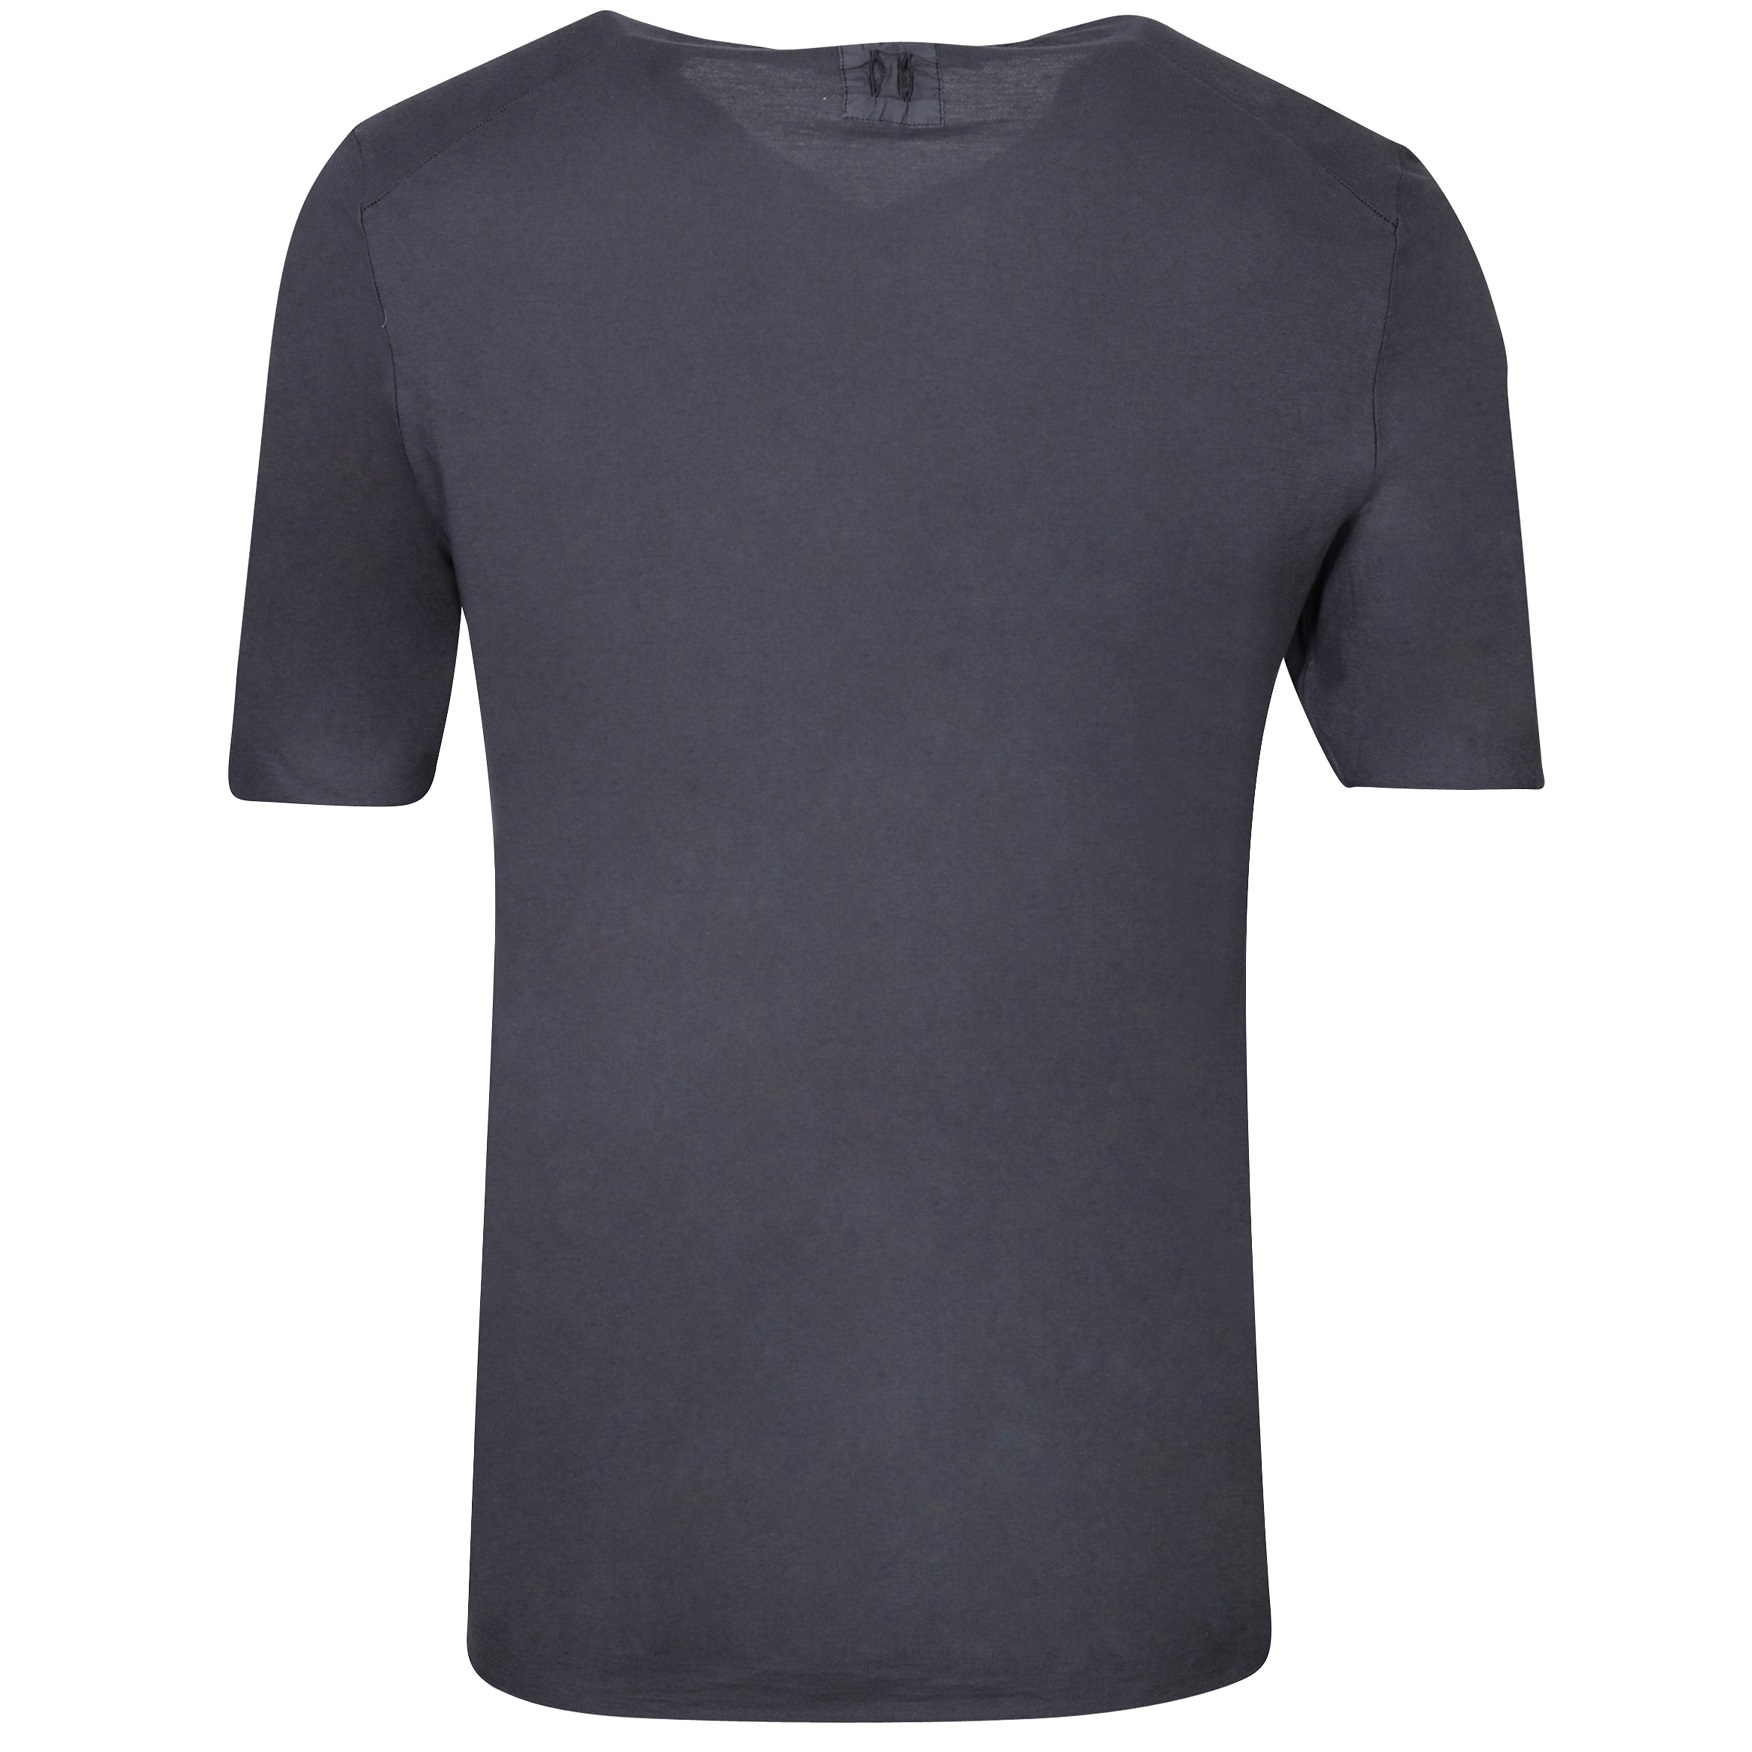 Hannes Roether V-Neck T-Shirt in Posh M